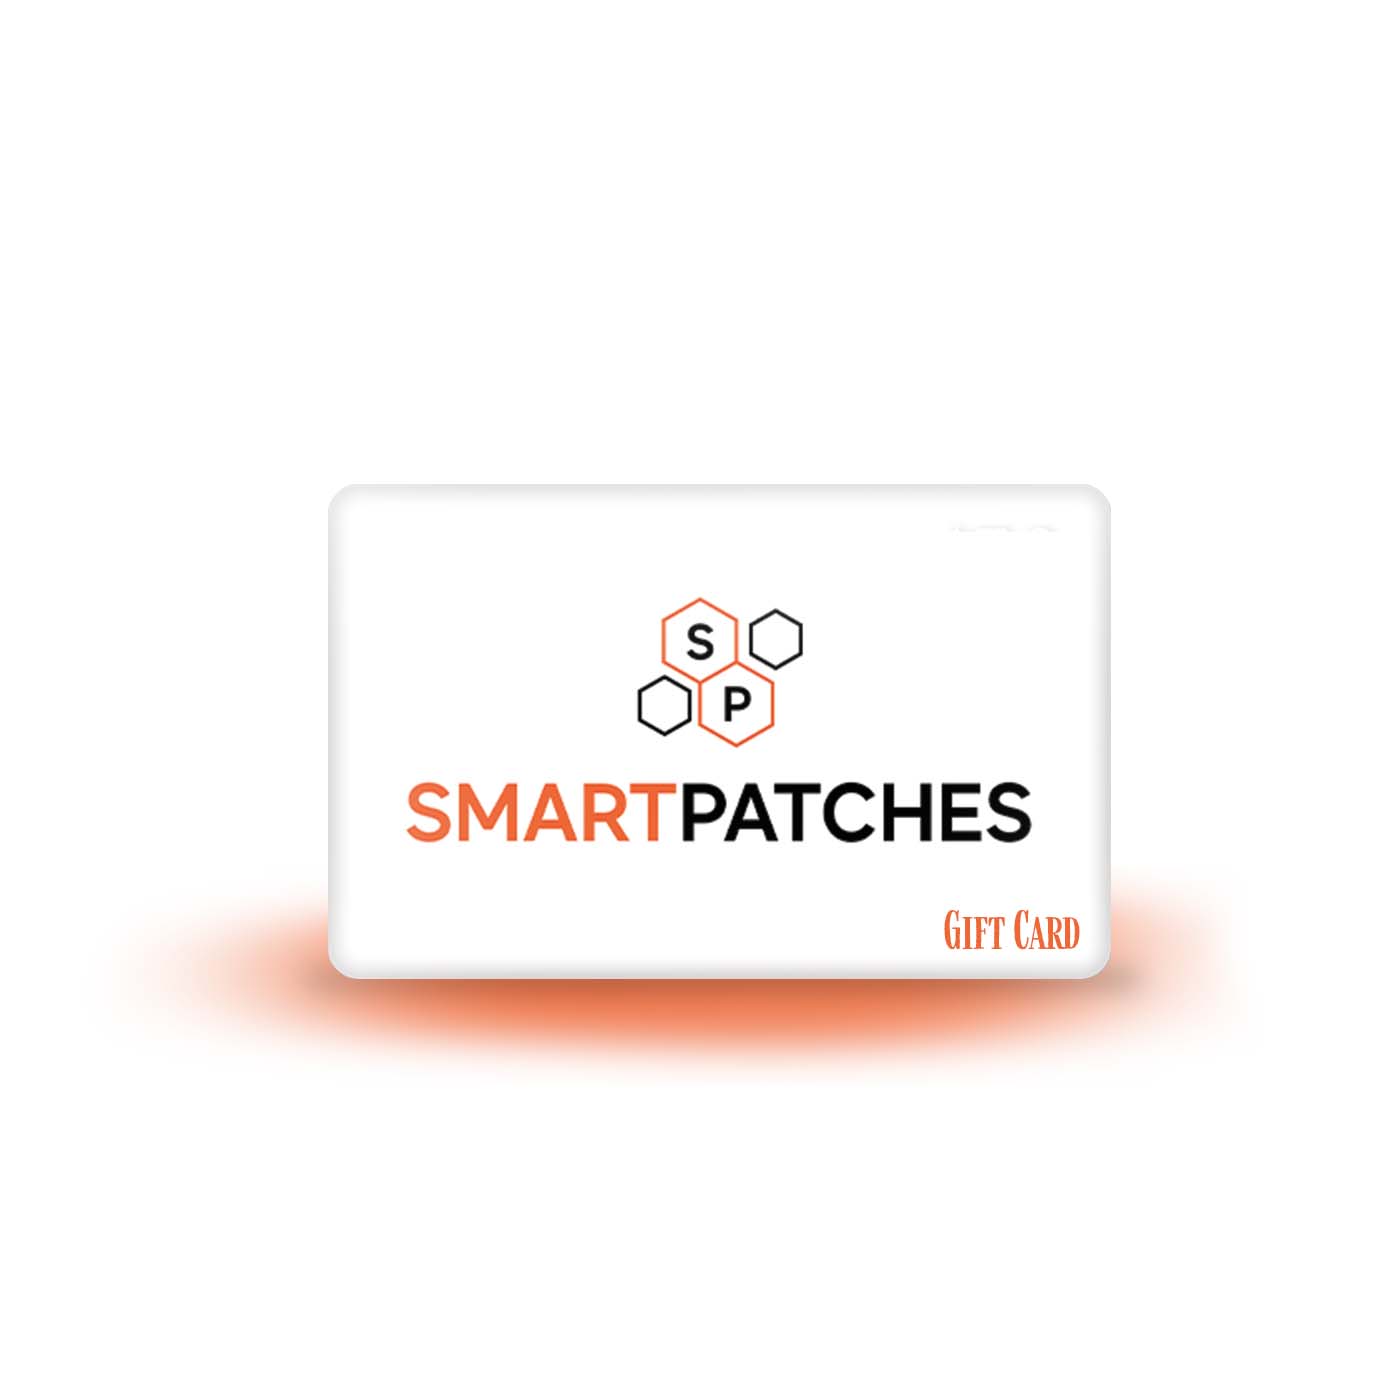 FREE Smart Patches Hangover Prevention Sample (use code FREESAMPLE at  checkout)